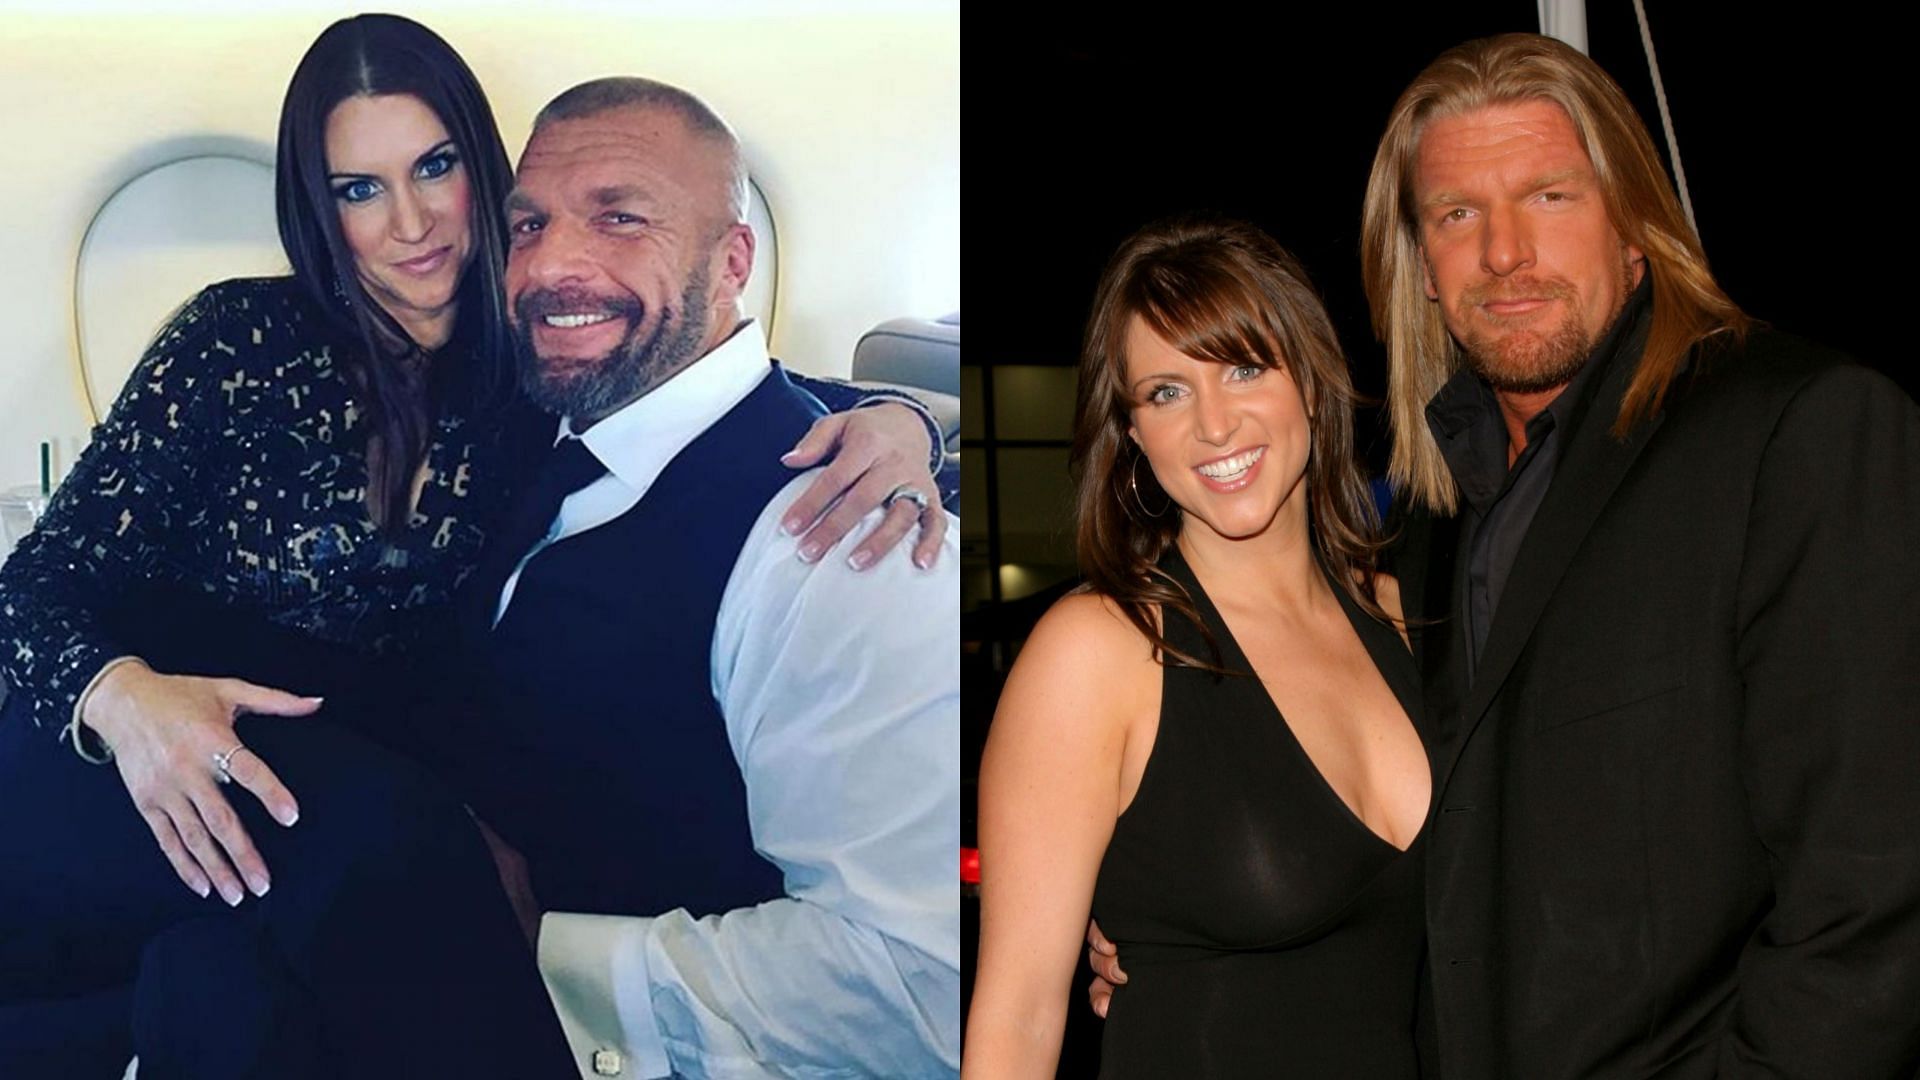 Triple H and Stephanie McMahon have been married for nearly two decades